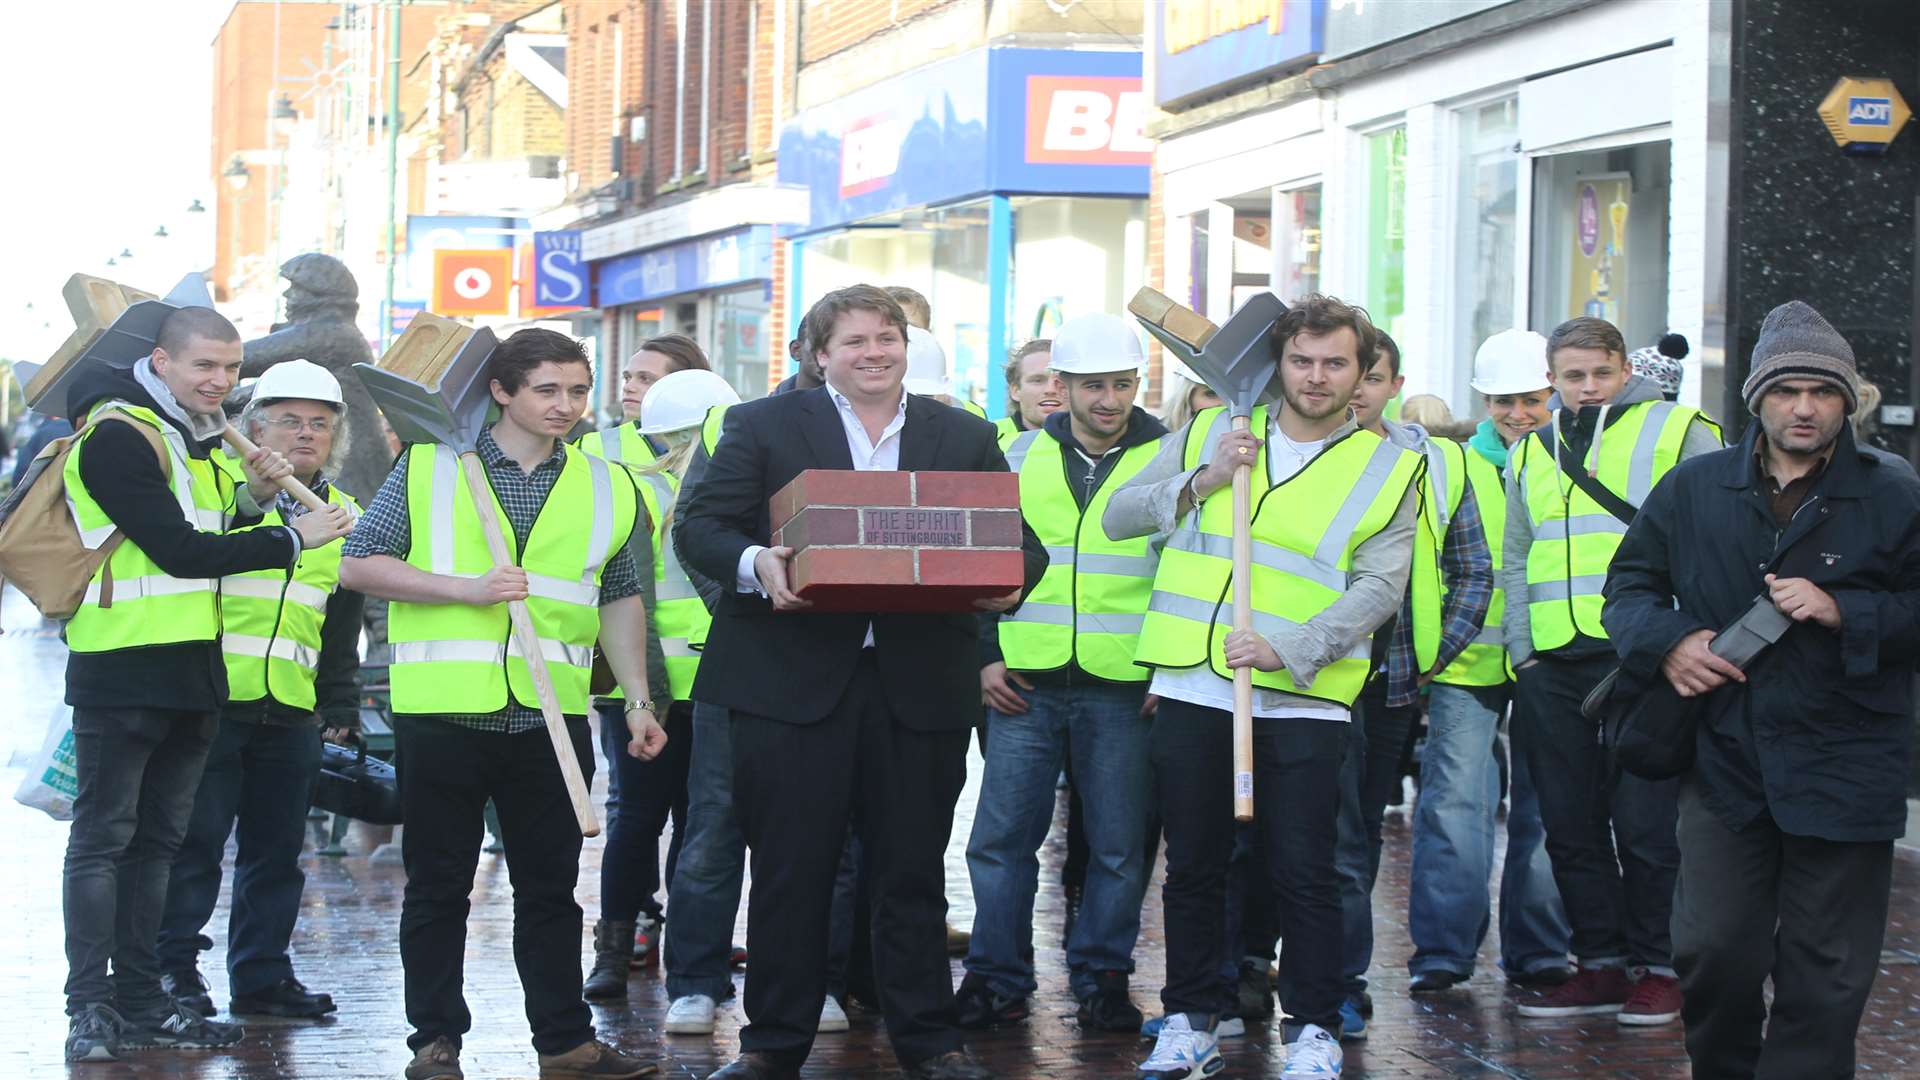 Fergus Pryor, development manager from the Cathedral Group, led a group of bricklayers down Sittingbourne High Street